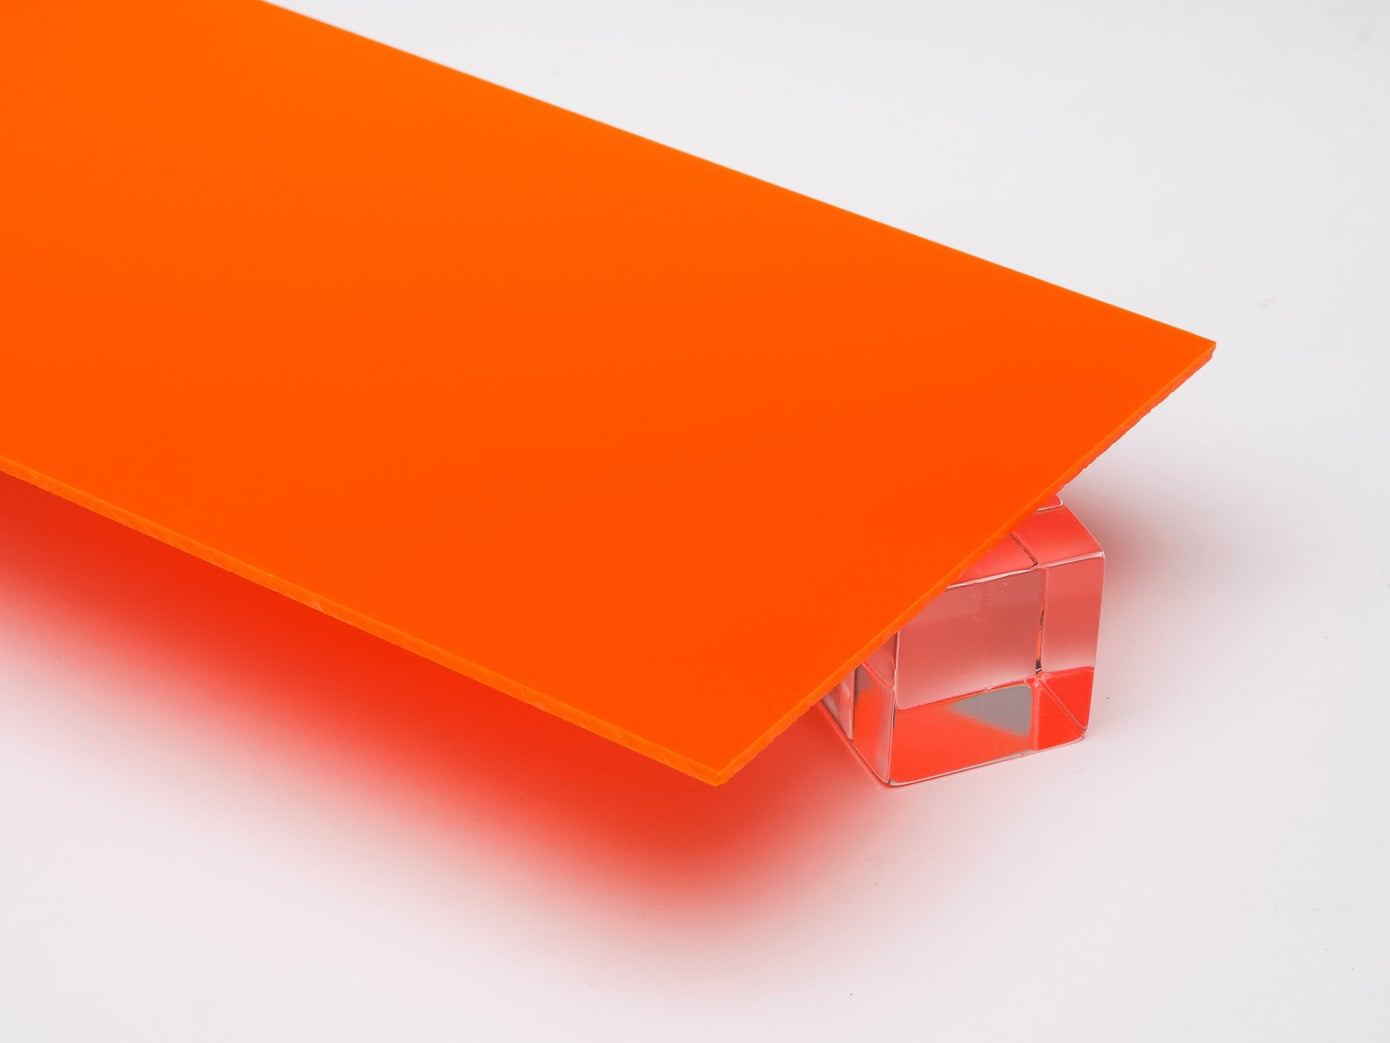 Cast Acrylic Sheet - Opaque Colors - Multiple Colors Available - 0.125" (3mm) Thick